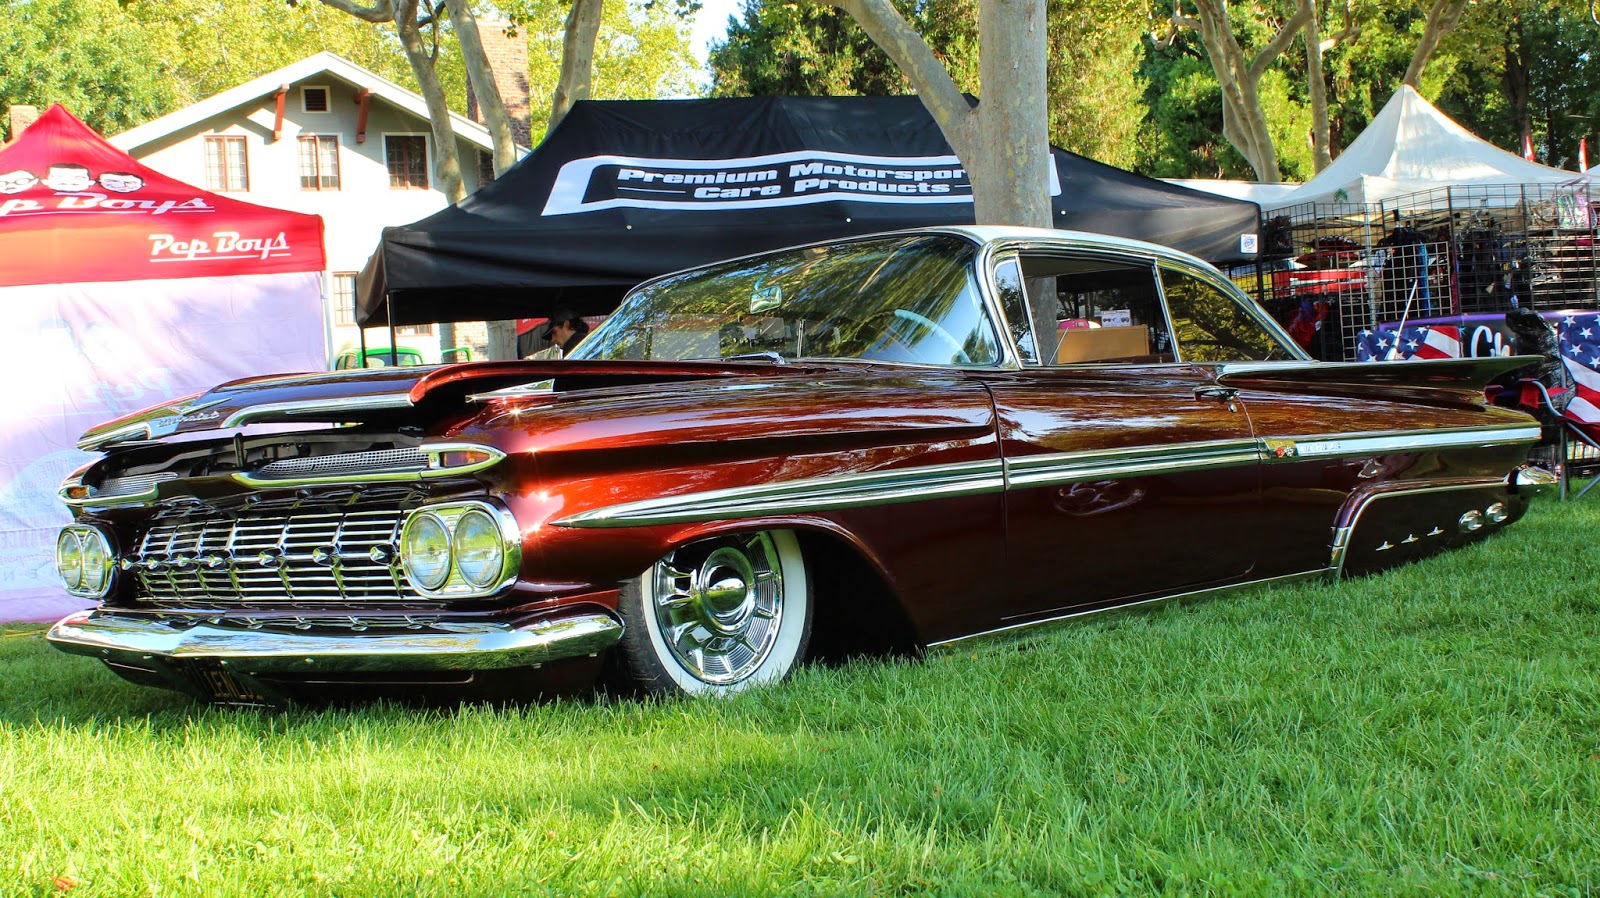 Covering Classic Cars Photos From The 2014 Goodguys West Coast in classic cars pleasanton